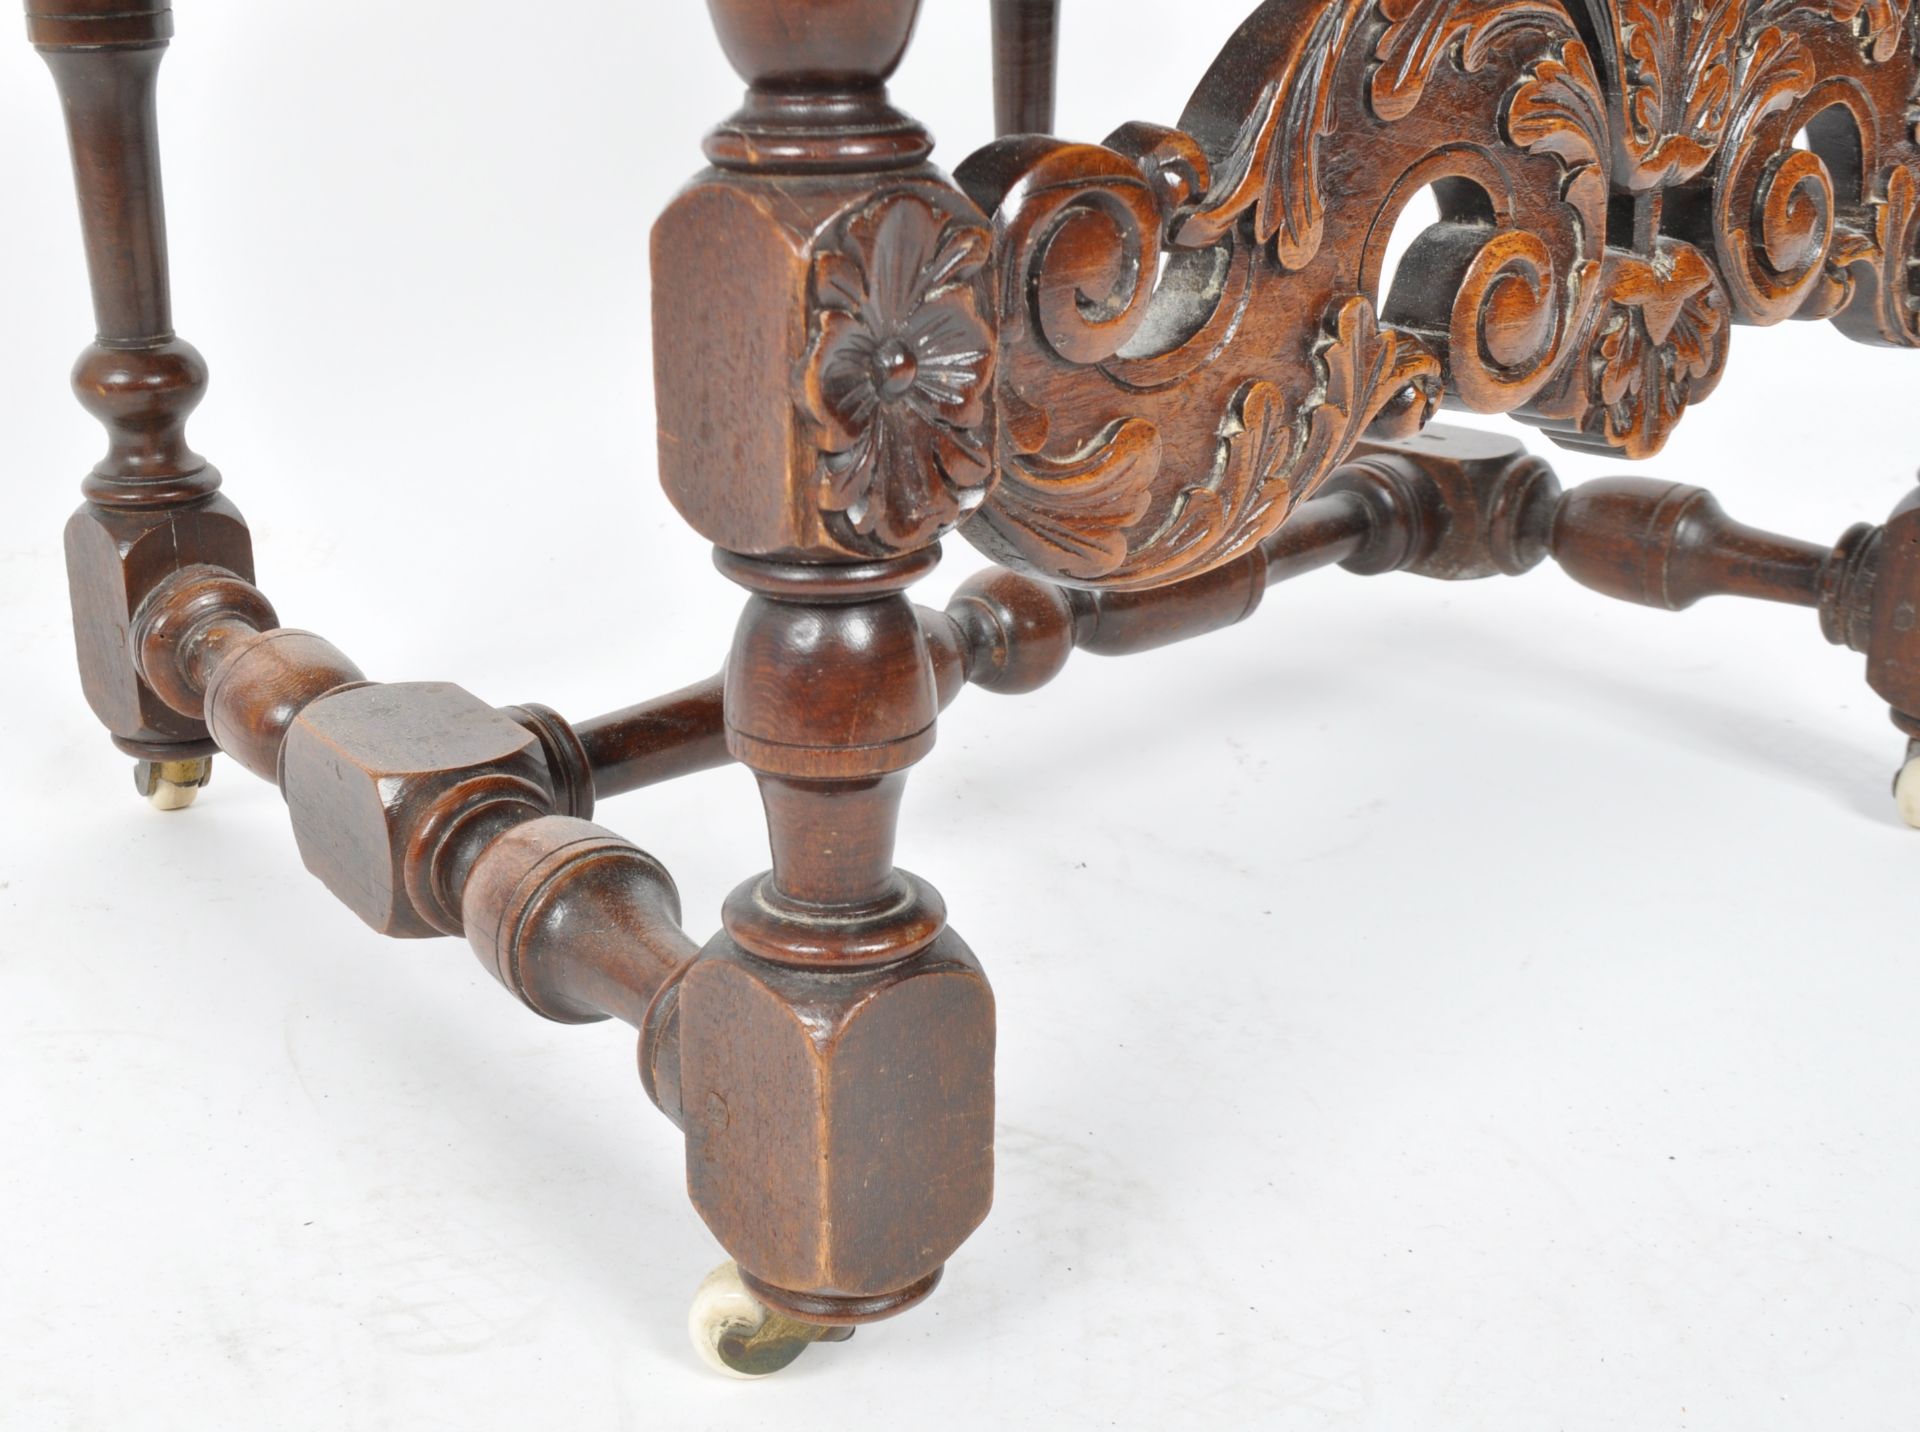 LATE 19TH CENTURY CARVED MAHOGANY STOOL - Image 4 of 5